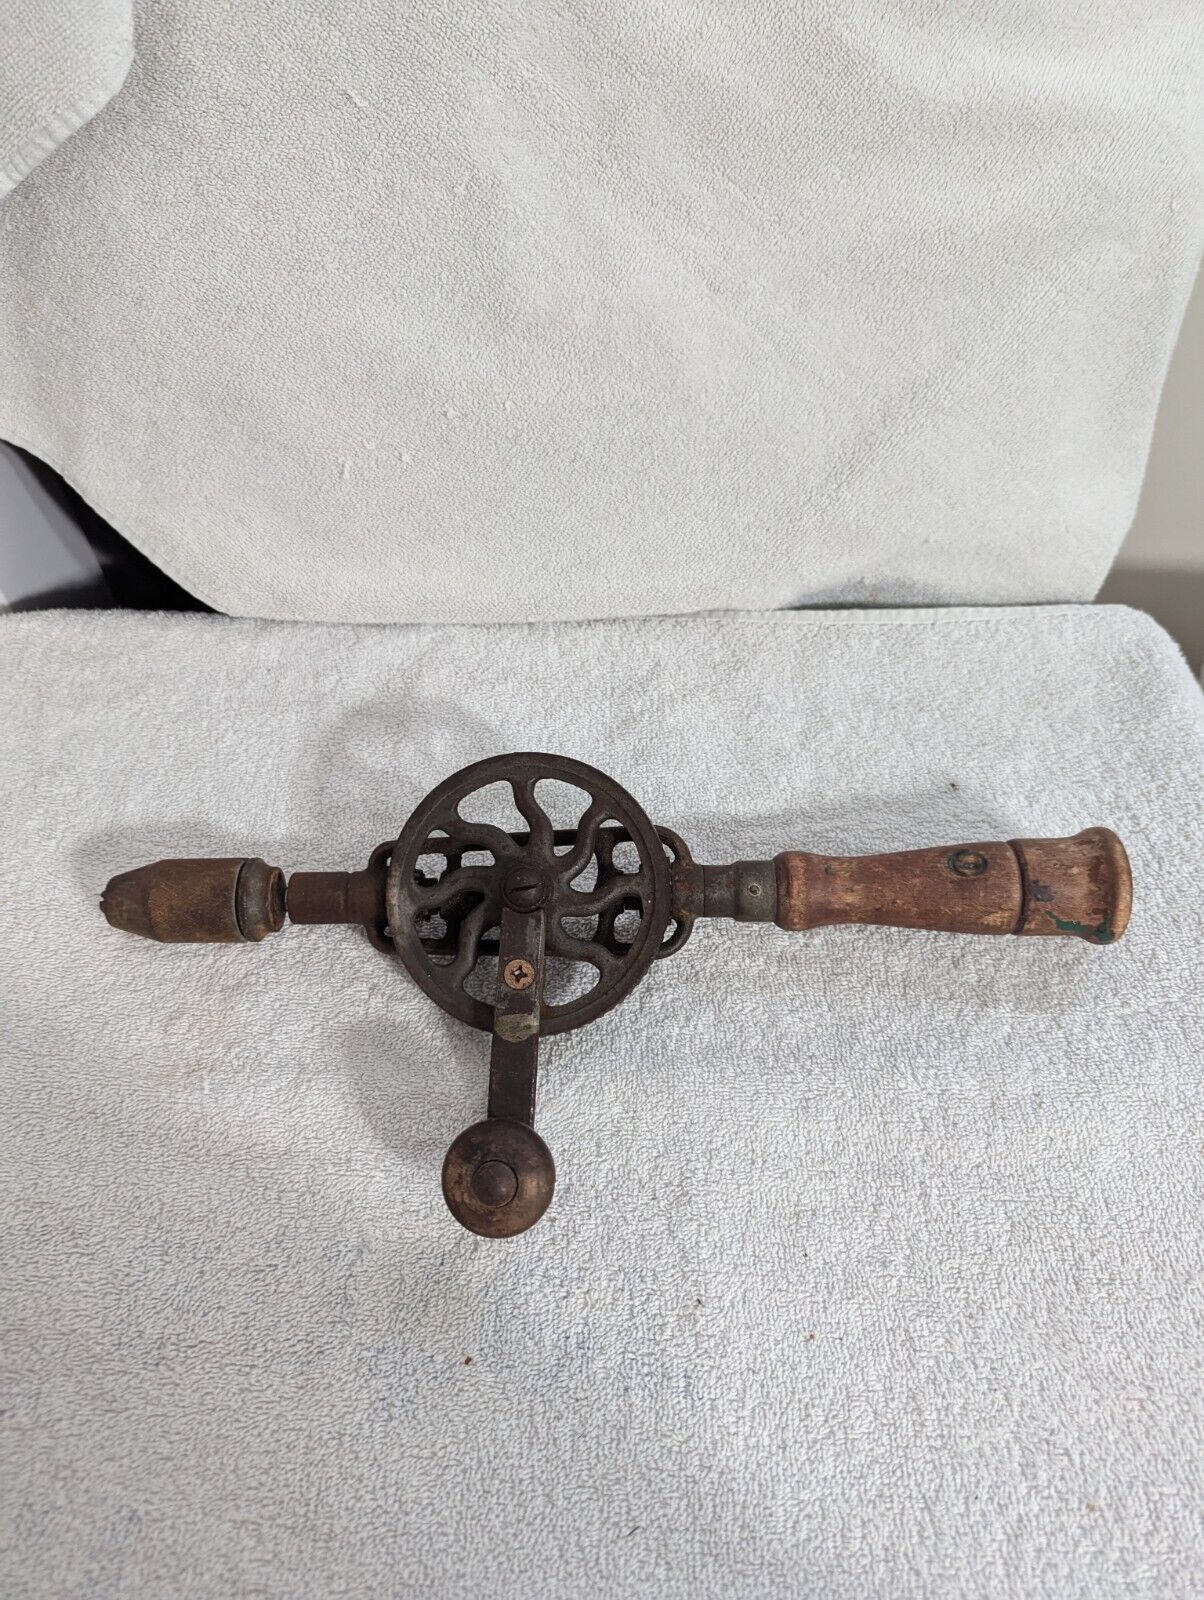 Antique  Eggbeater Hand Drill Vintage Tool 